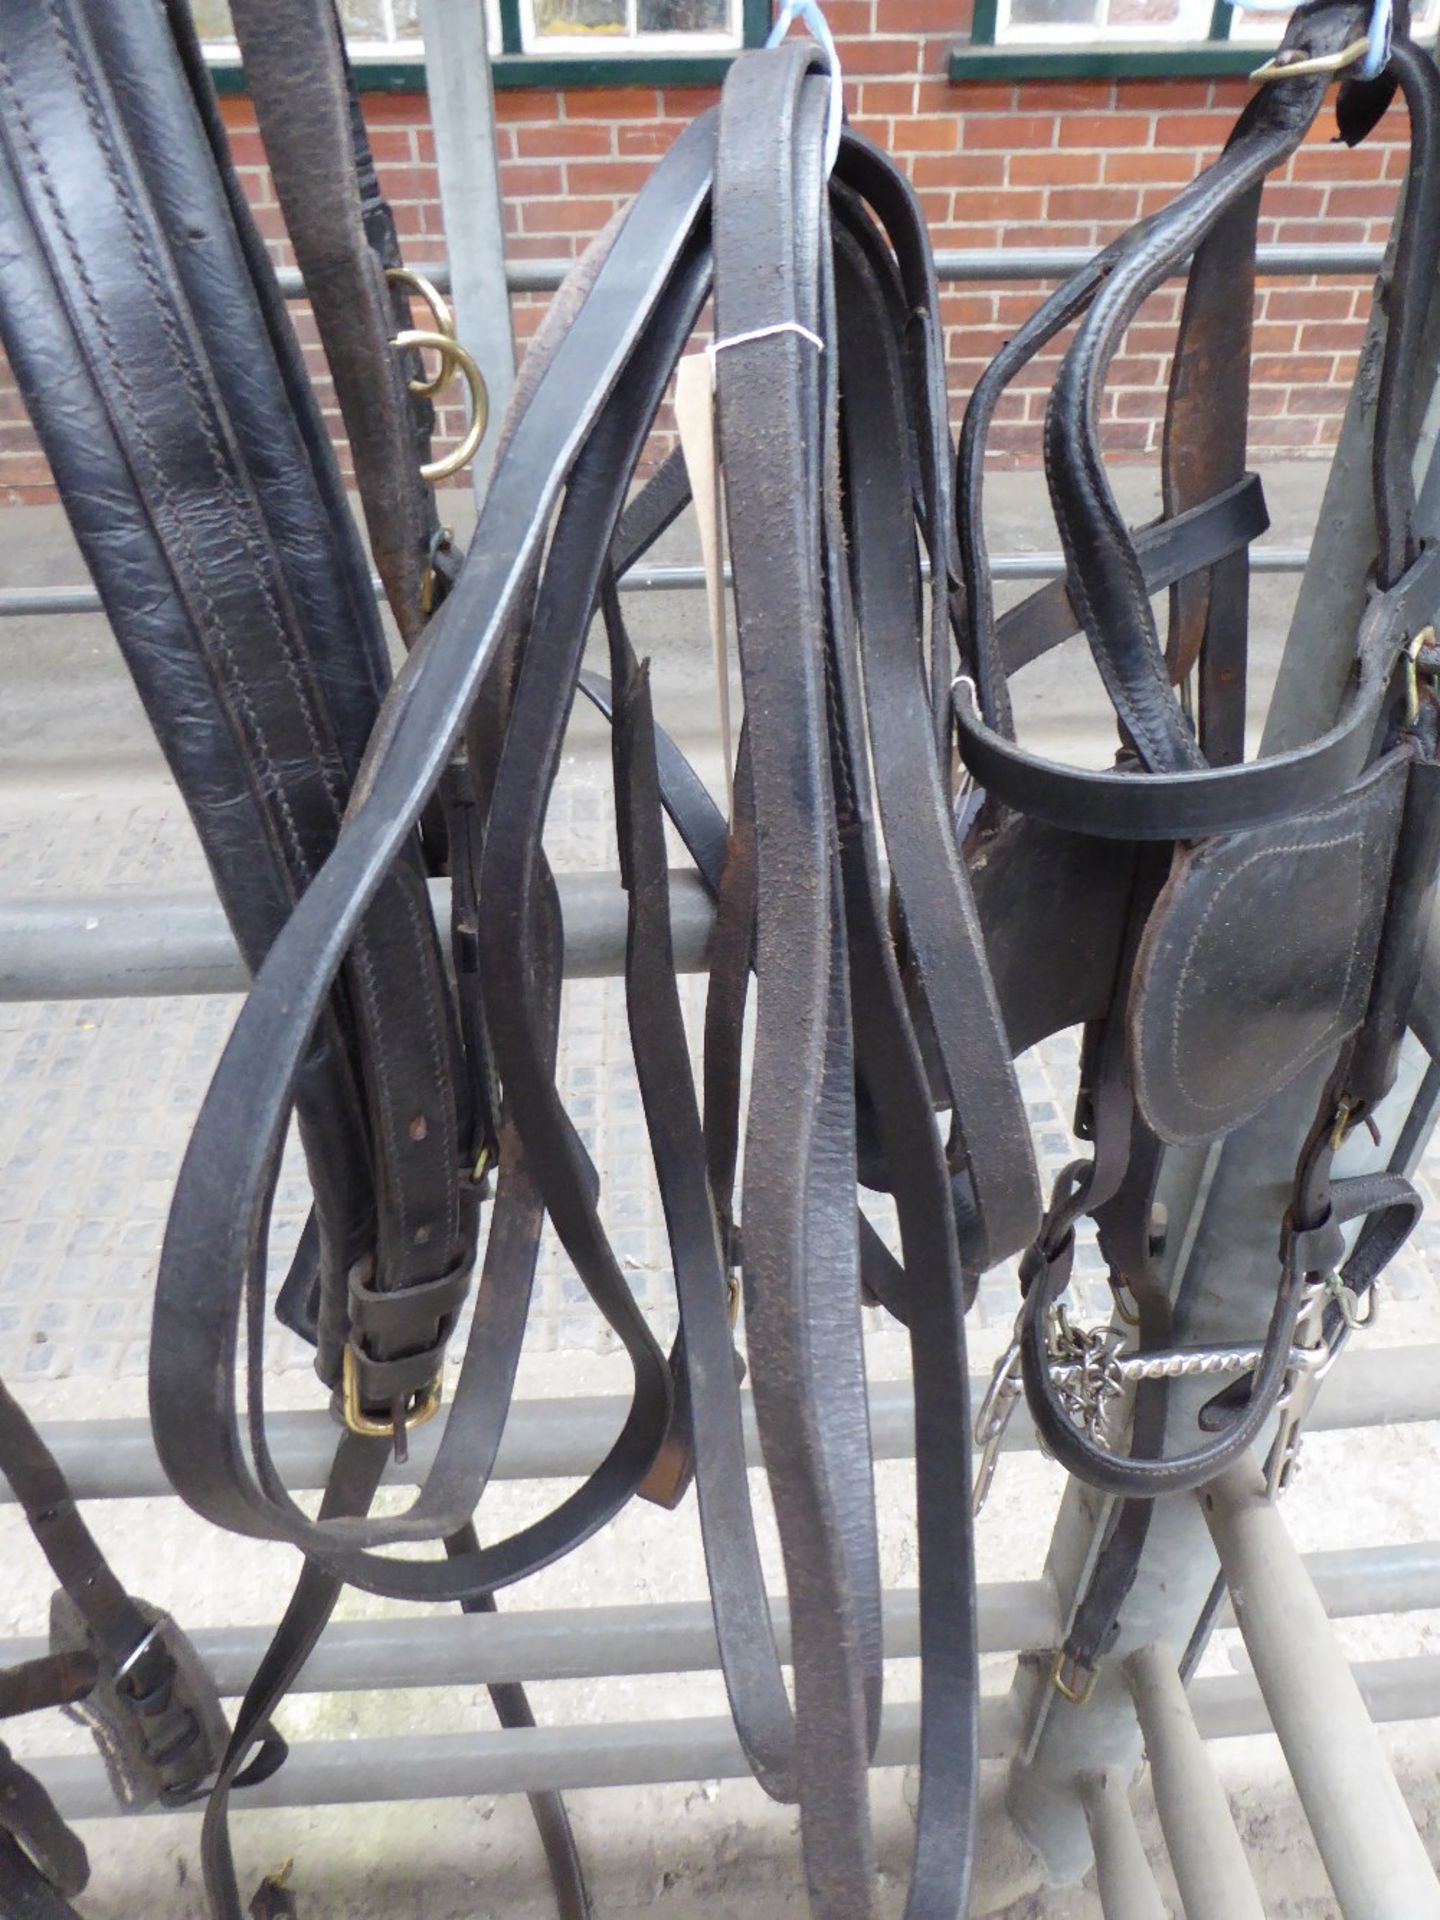 Complete set of leather harness to suit 14.2 to 15.3hh horses, with reins. In good condition. - Image 5 of 5